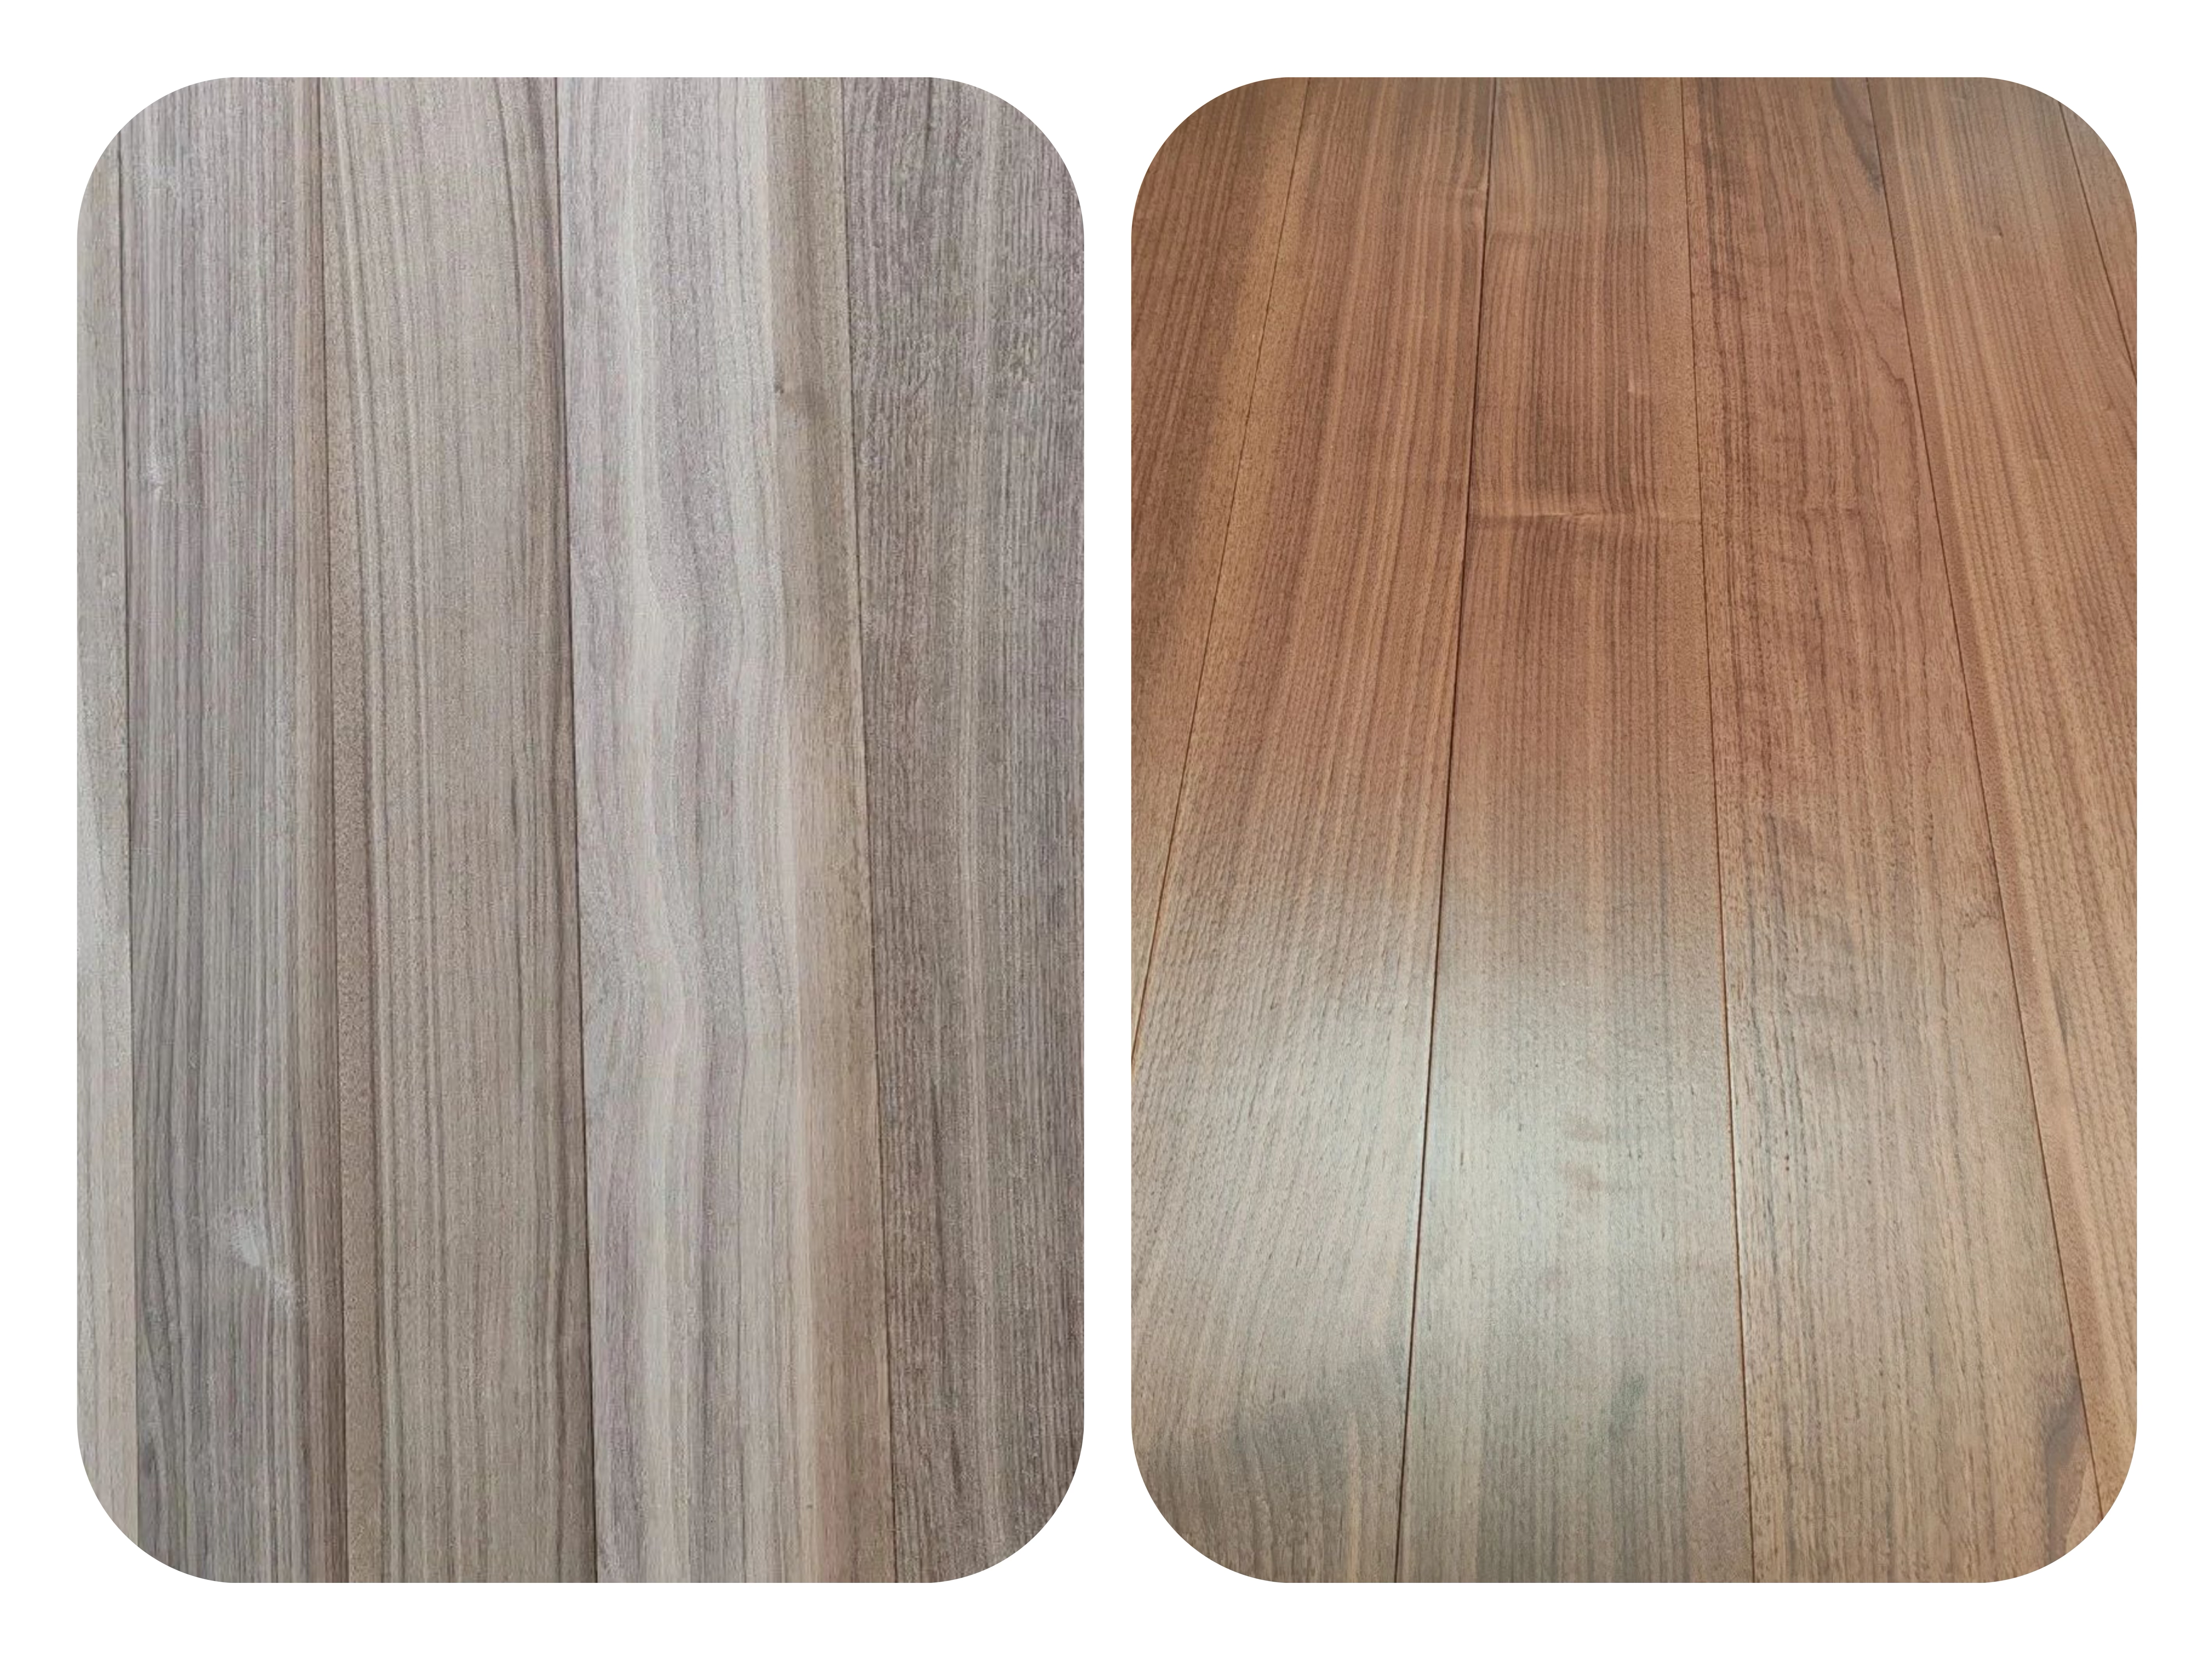 Himonia Floor Coating Case || How can I make a lighter colour effect with a black walnut "darker shade board"?